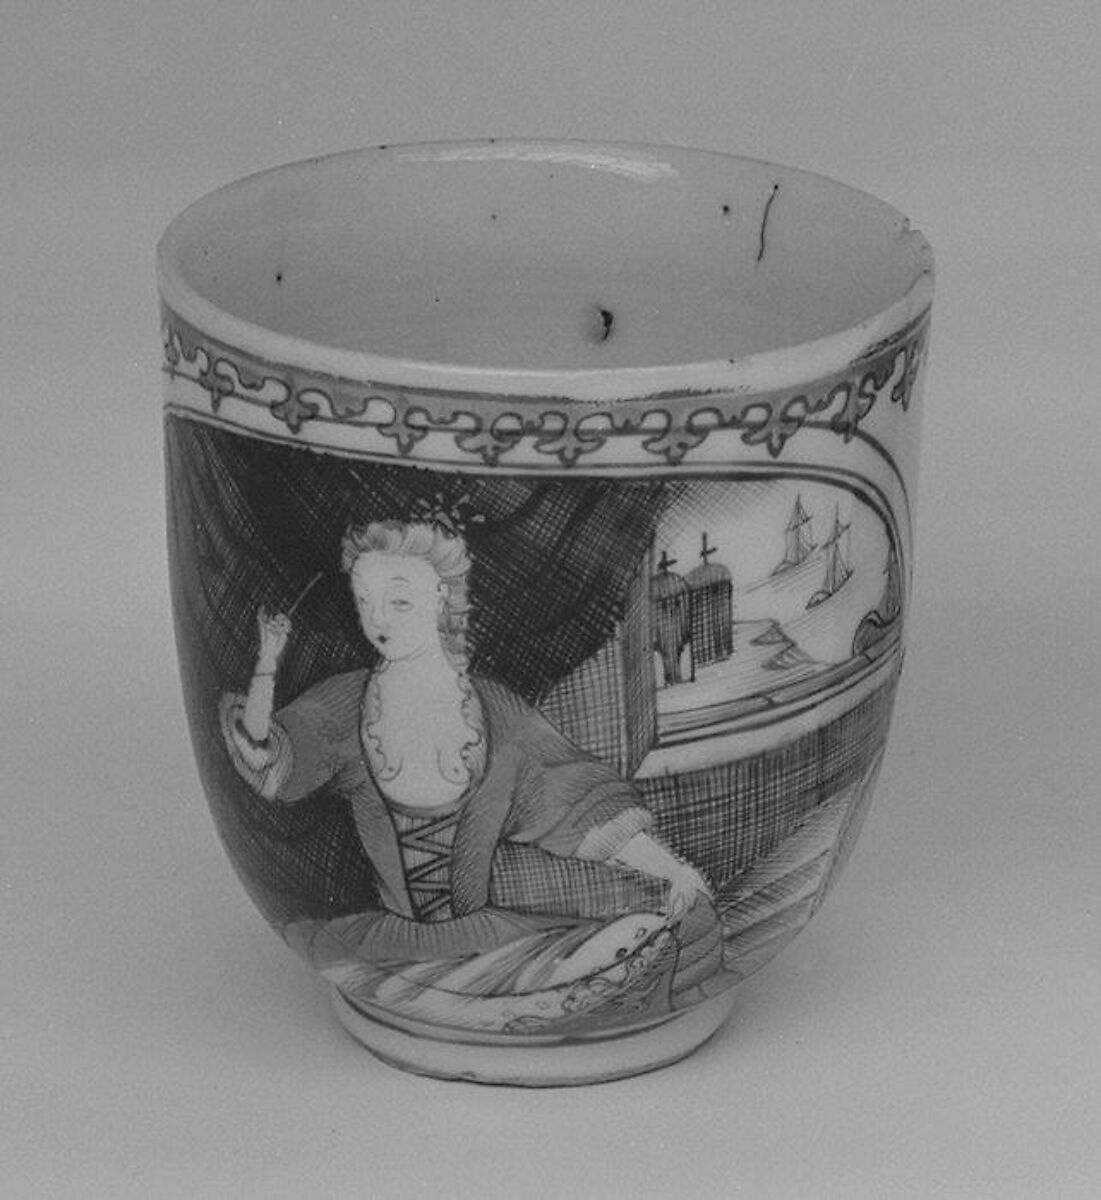 Metropolitan for | service) market Cup Dutch Museum of Chinese, possibly of Art | (part a The